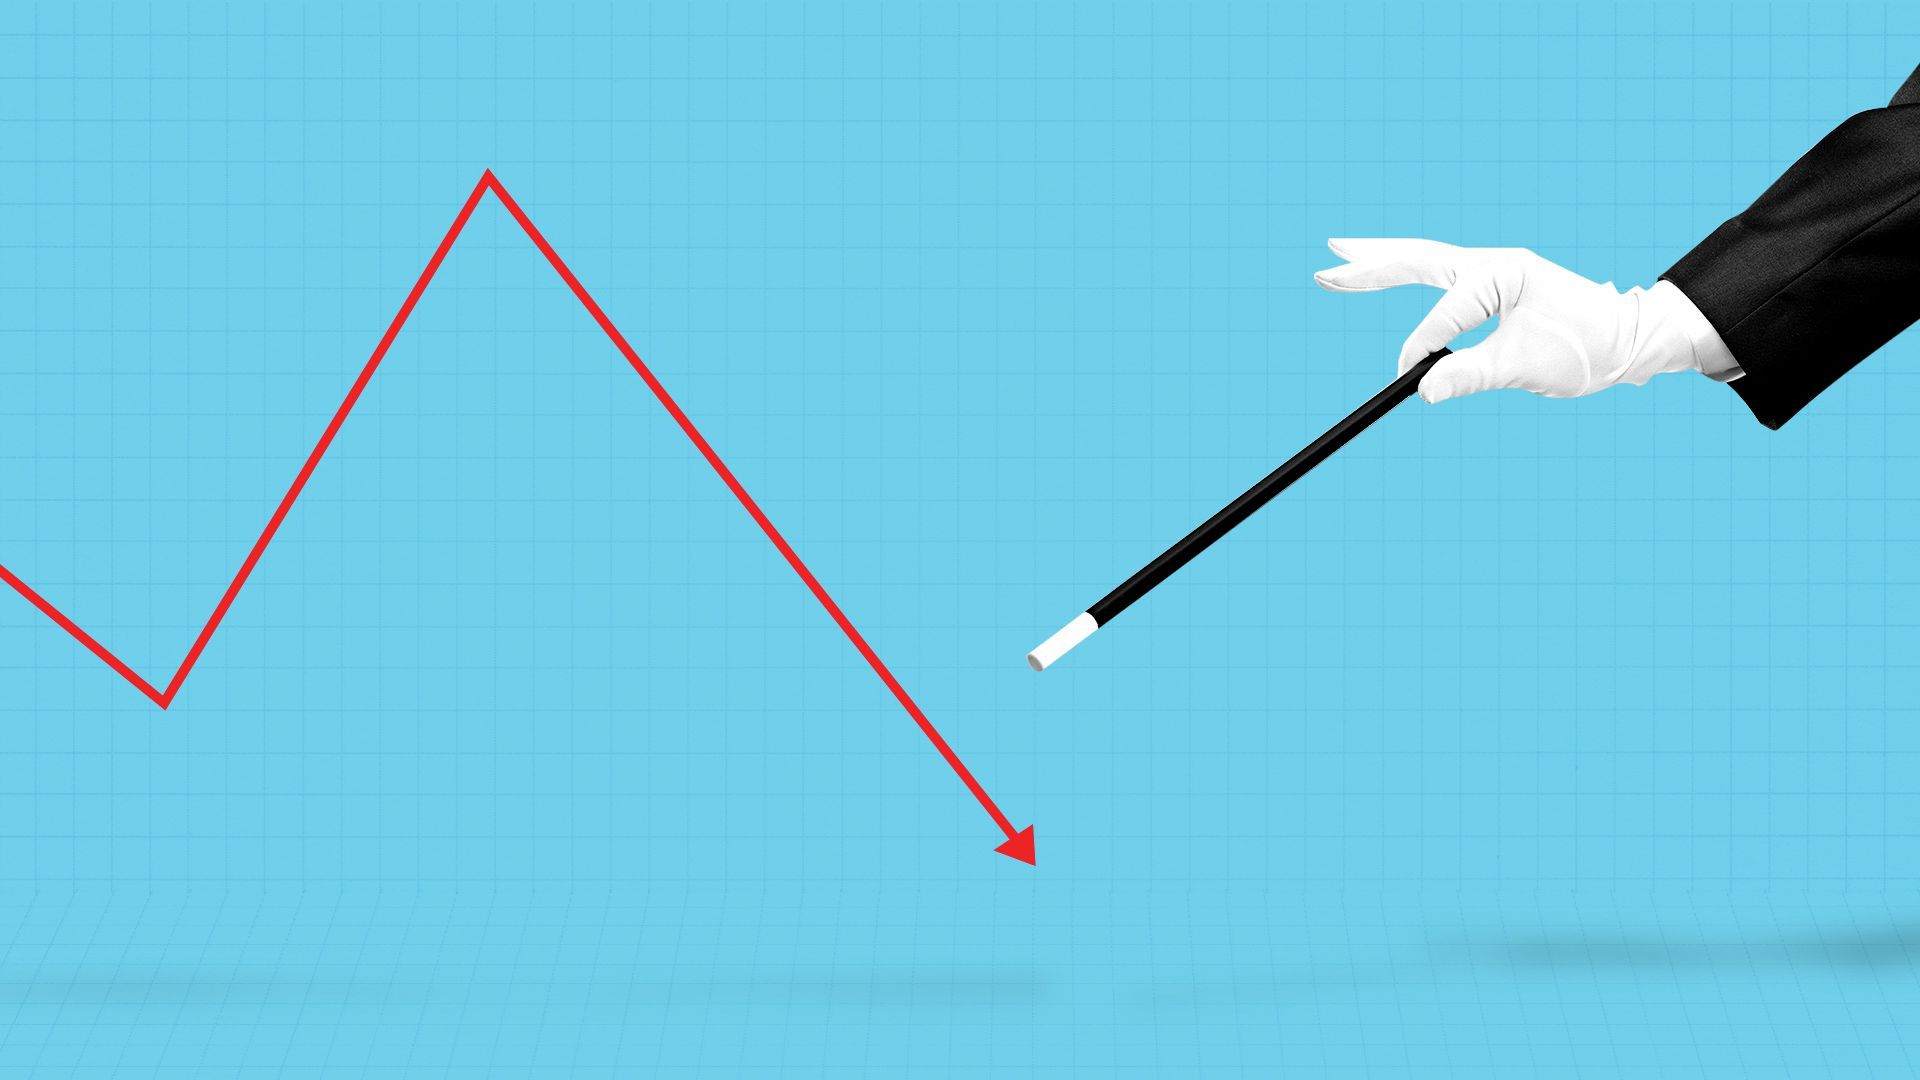 Illustration of a wand and a line graph